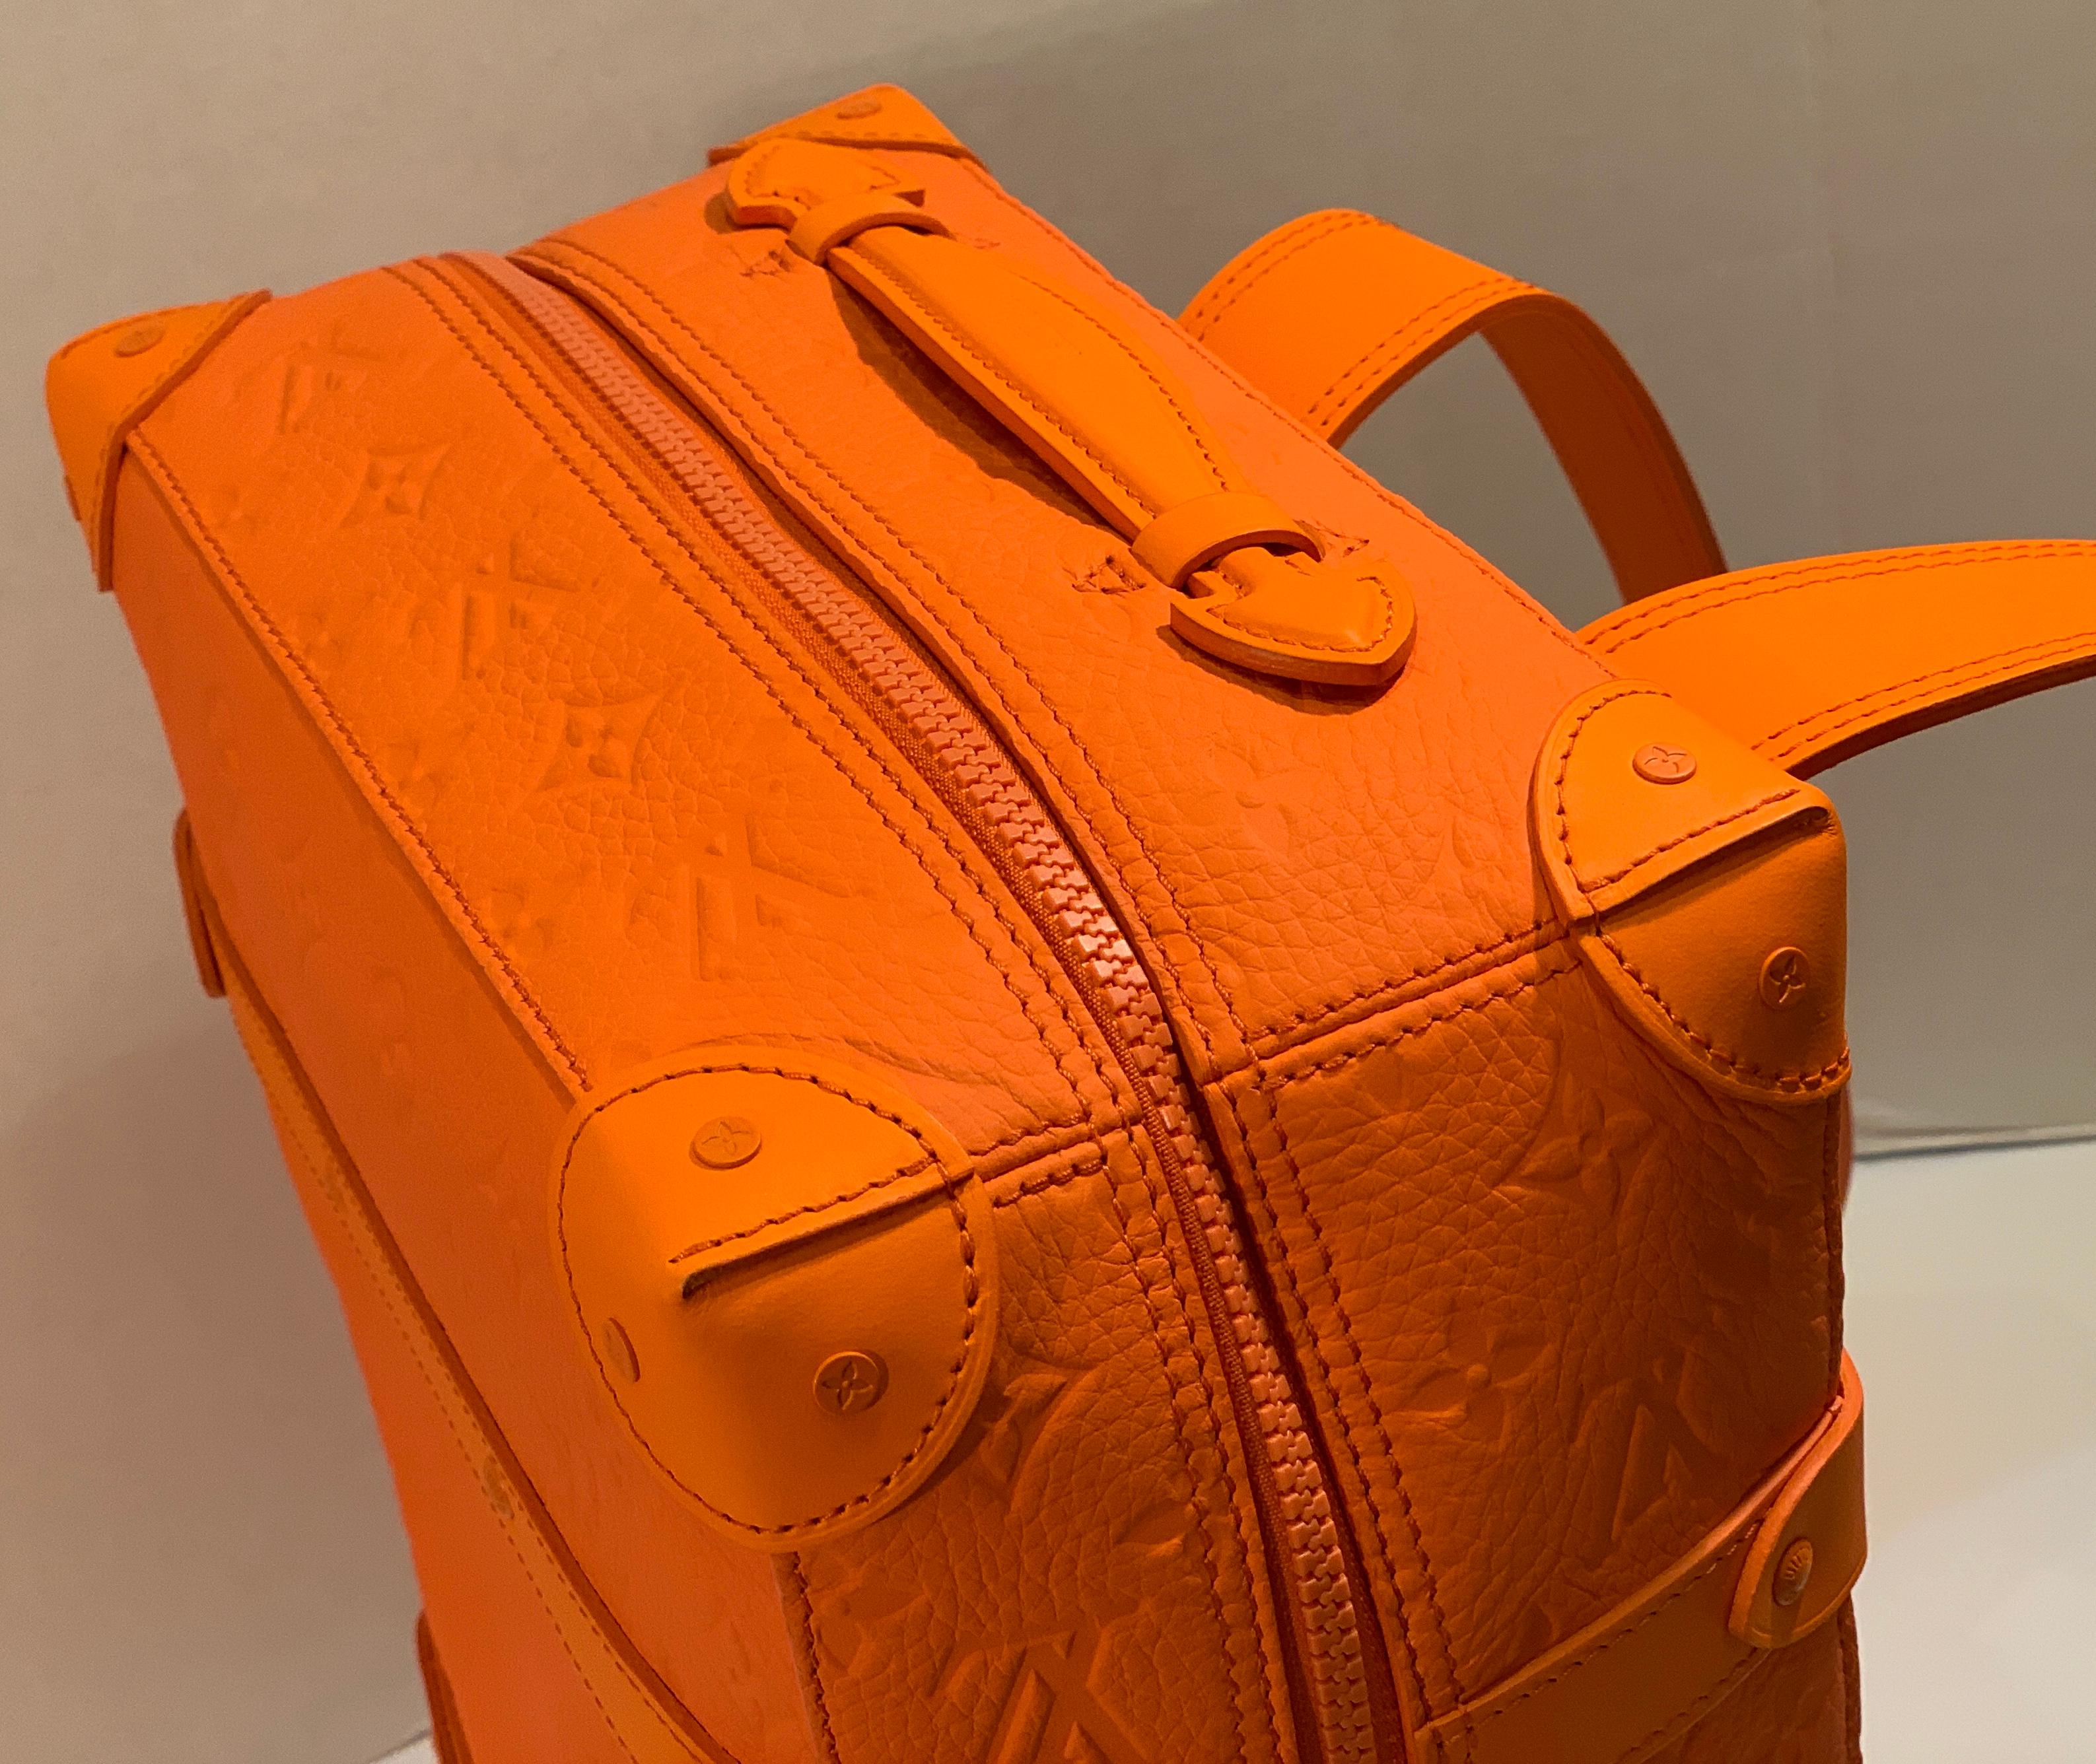 SOLD OUT Louis Vuitton Virgil Abloh Figures of Speech Orange Soft Trunk Backpack 5